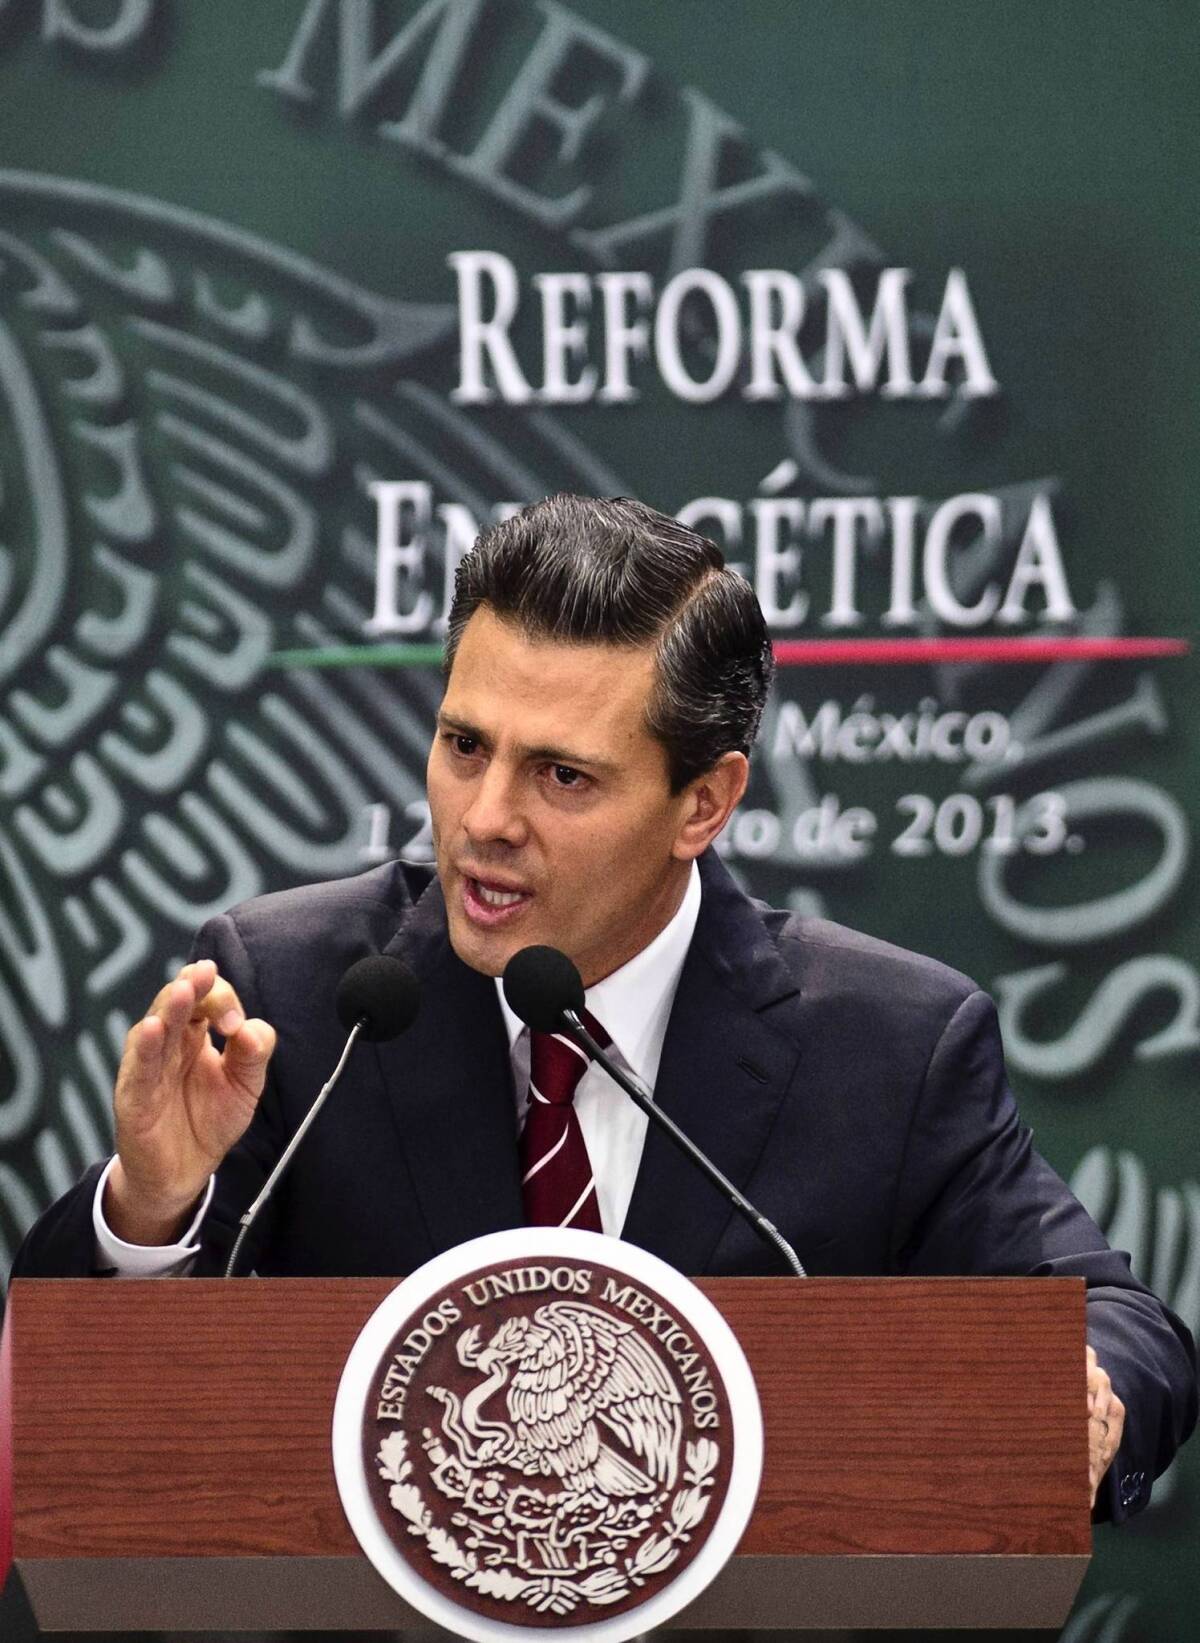 President Enrique Peña Nieto unveiled the proposal to reform Mexico's energy sector Monday, saying changes were necessary to make the state oil company, Petroleos Mexicanos, or Pemex, more efficient and to boost the economy.